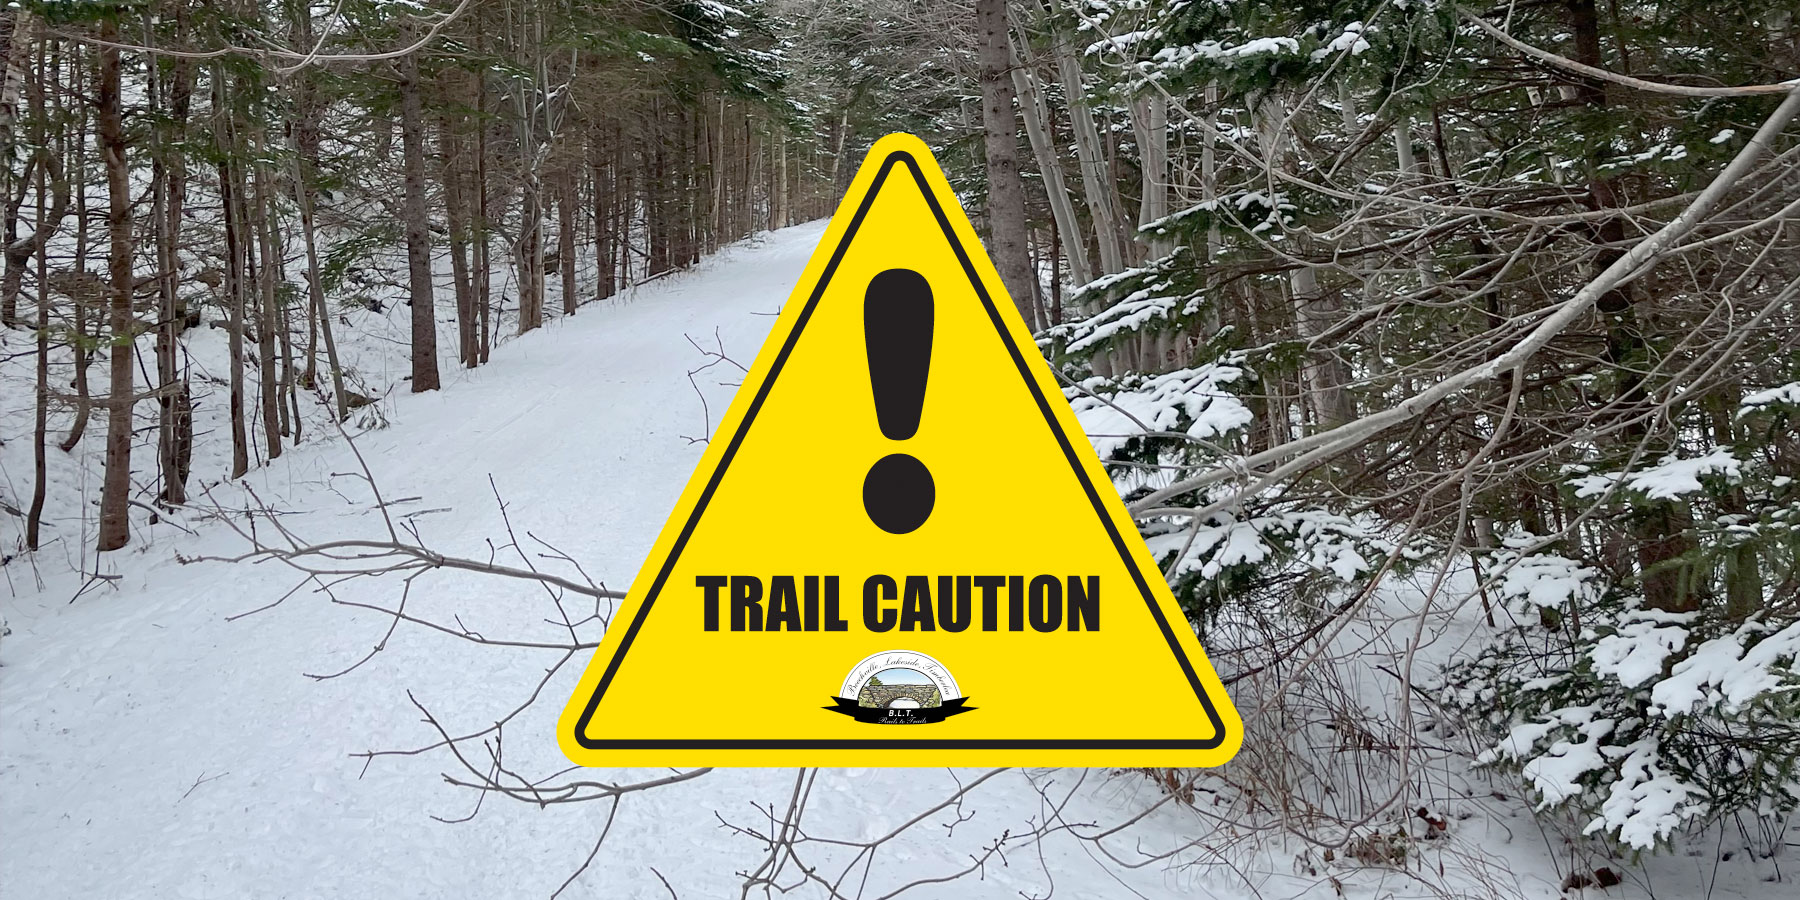 Trail Caution - Downed trees and branches